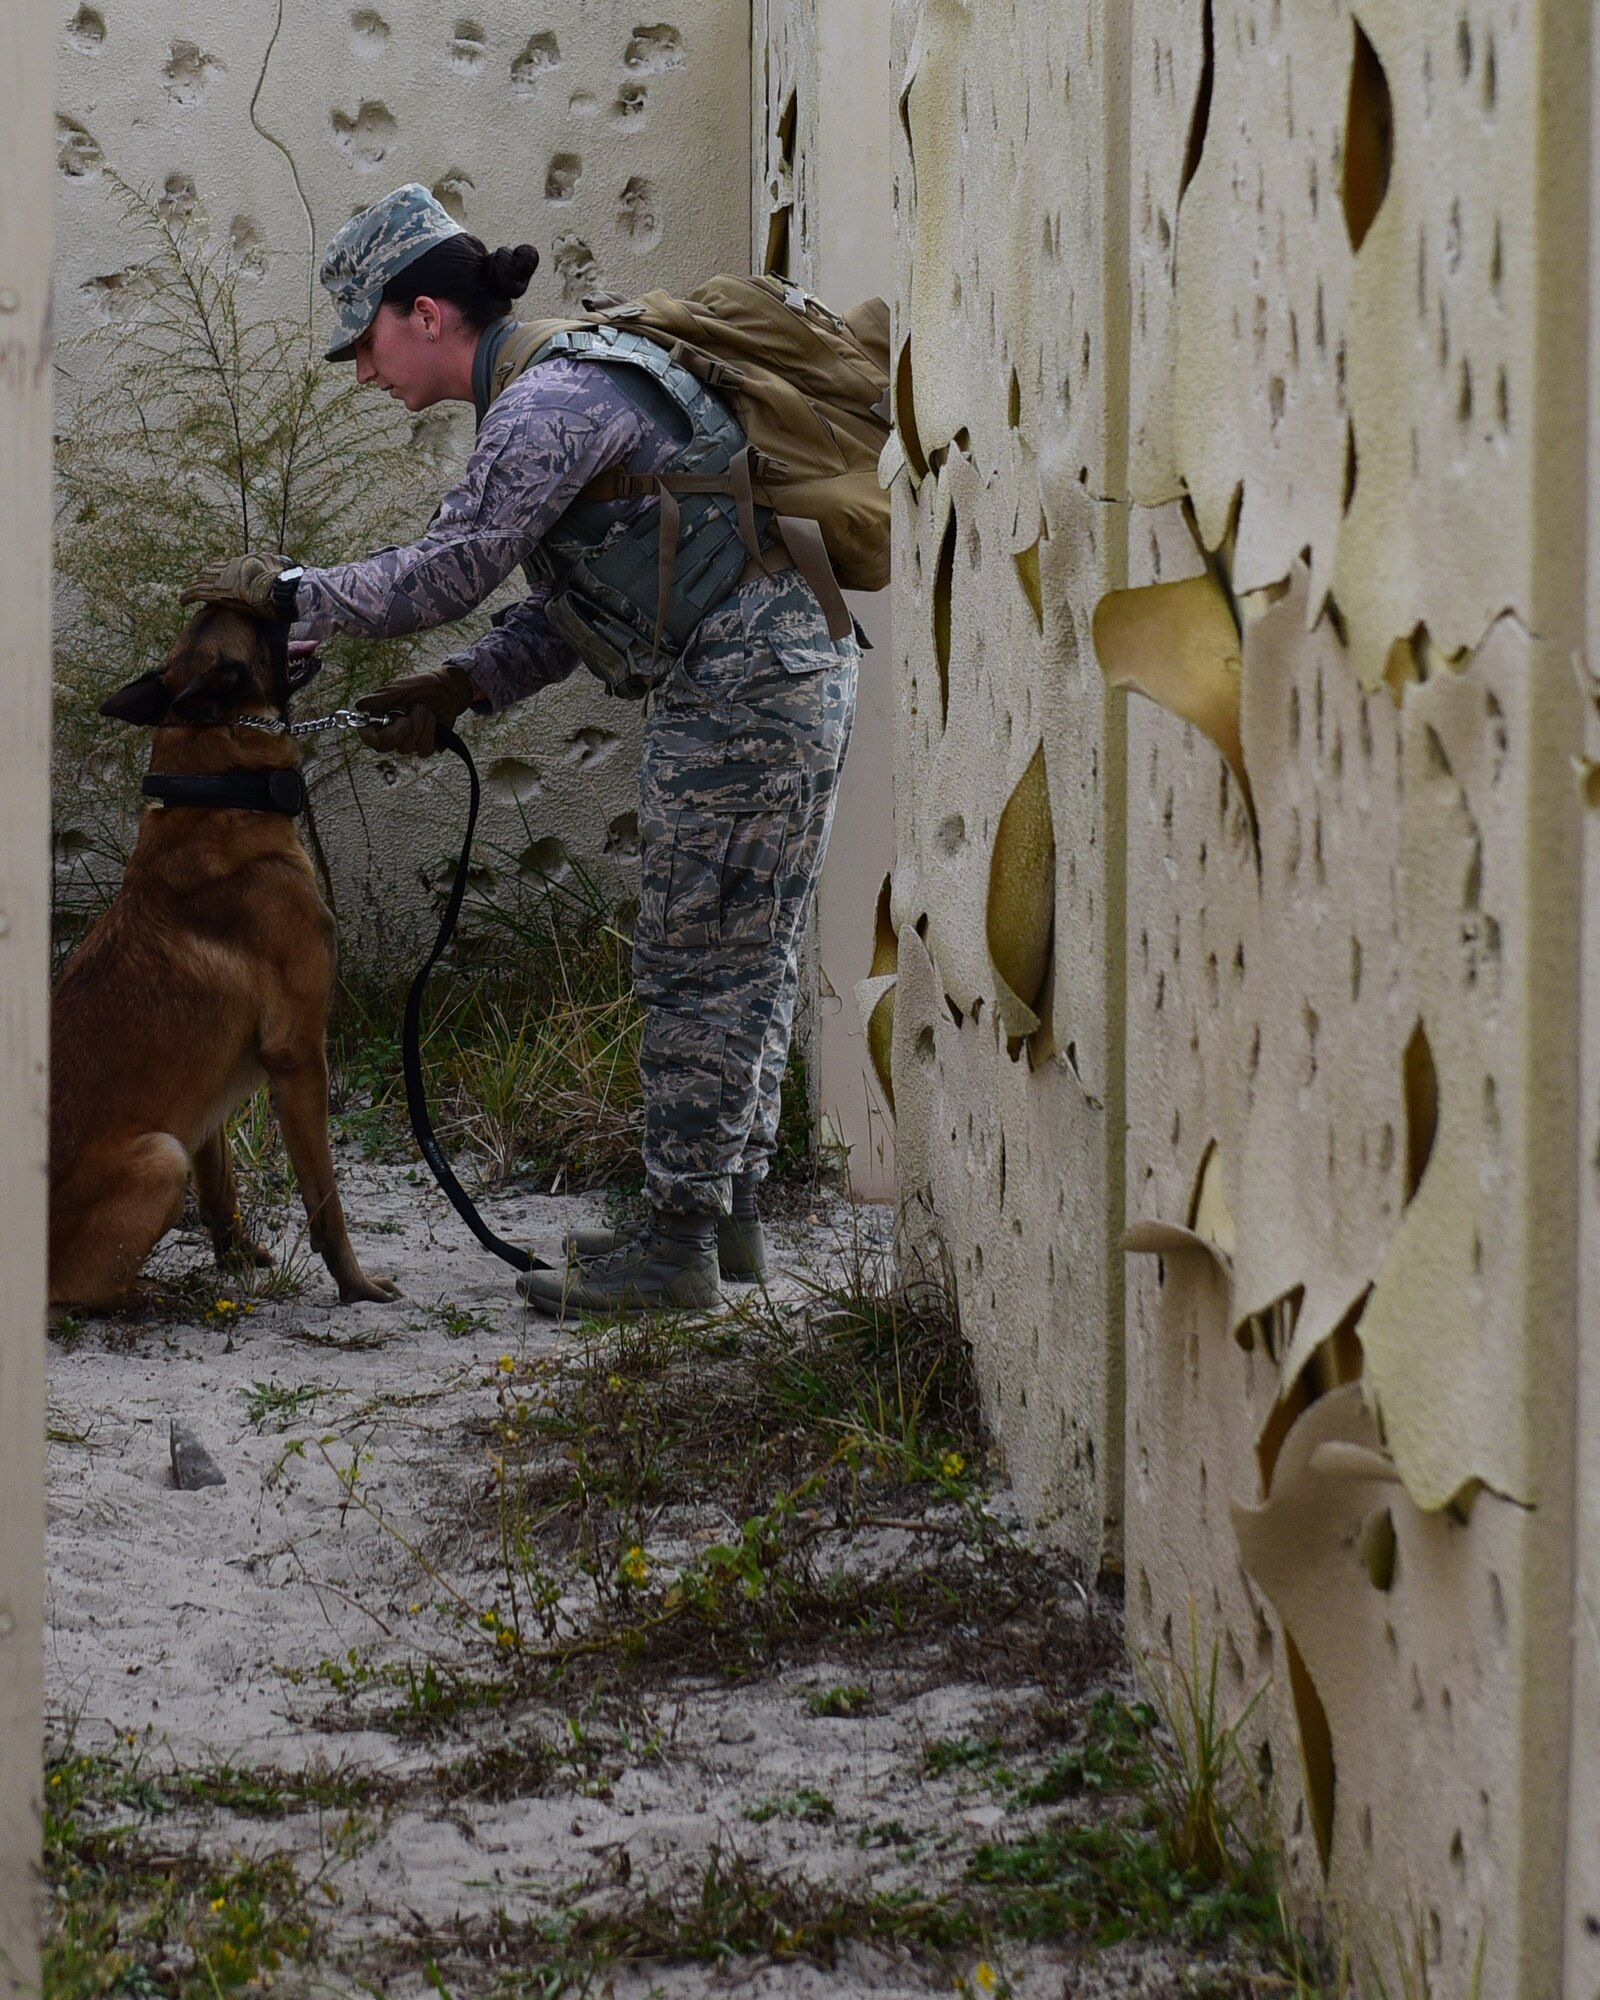 U.S. Air Force Staff Sgt. Caitlin Bourque, 325th Security Forces Squadron military working dog handler, checks her partner during an exercise at Tyndall Air Force Base, Fla., Nov. 27, 2017. A military working dog handler is responsible for the care and training of his or her service dog, which contributes to combat operations abroad and installation security at home by providing target odor detection for both explosives and drugs. (U.S. Air Force photo by Senior Airman Cody R. Miller/Released)